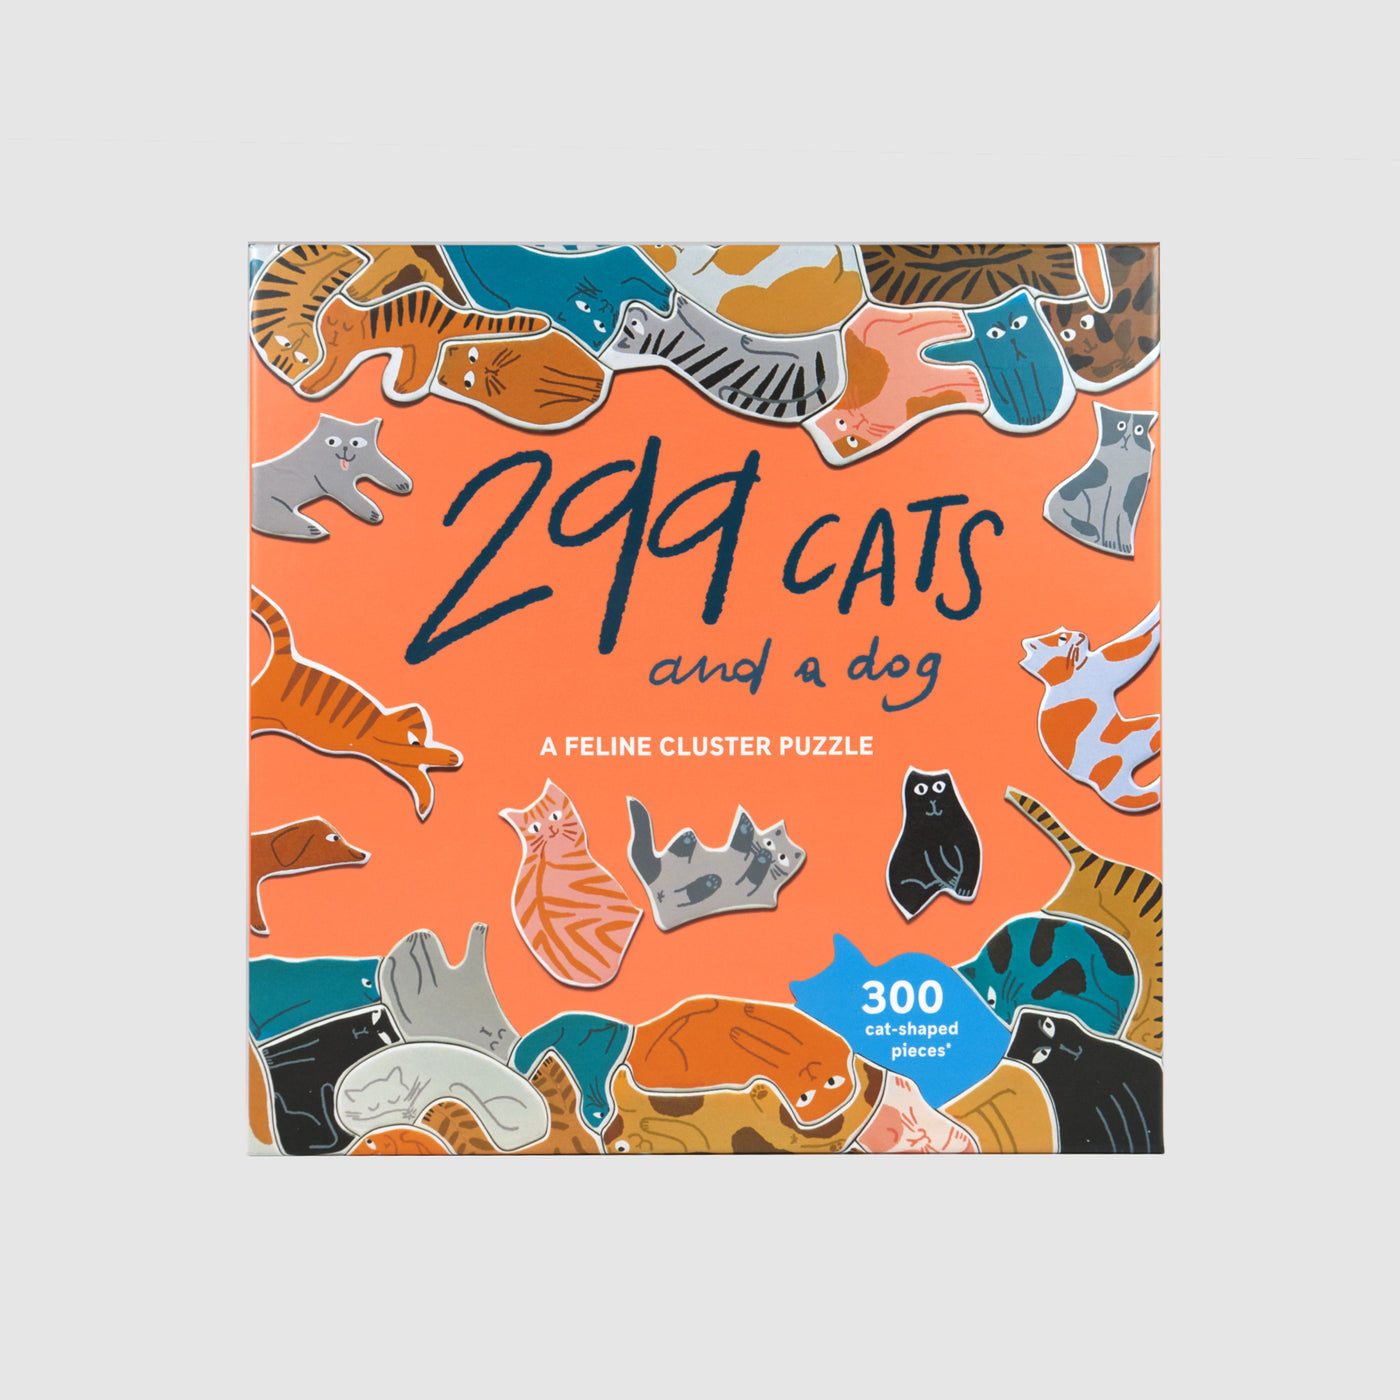 299 Cats (And a Dog)